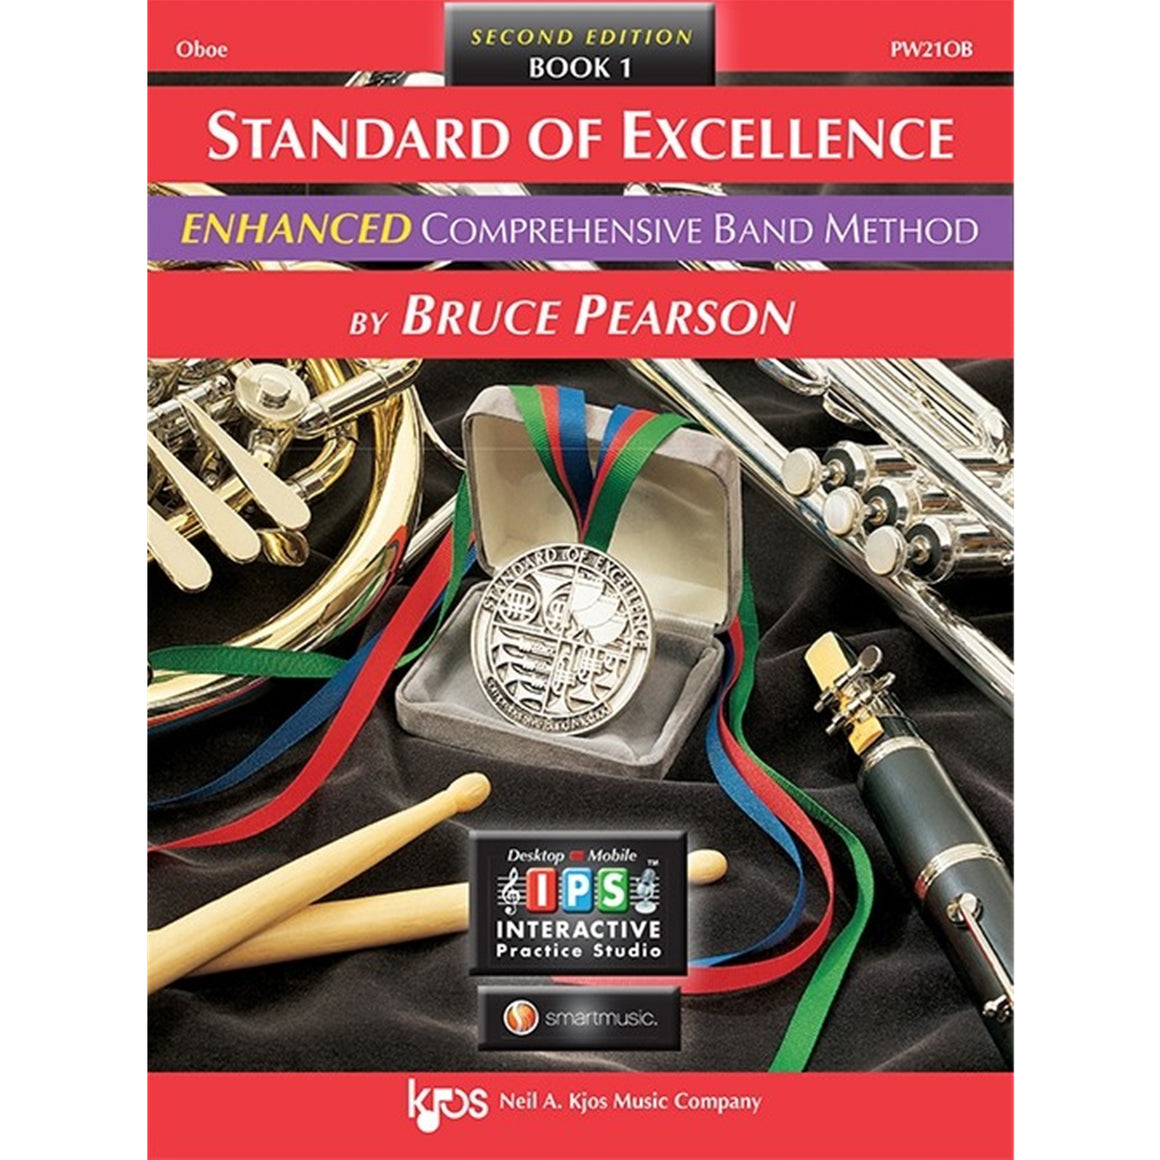 KJOS PW21OB Standard of Excellence Book 1 Oboe